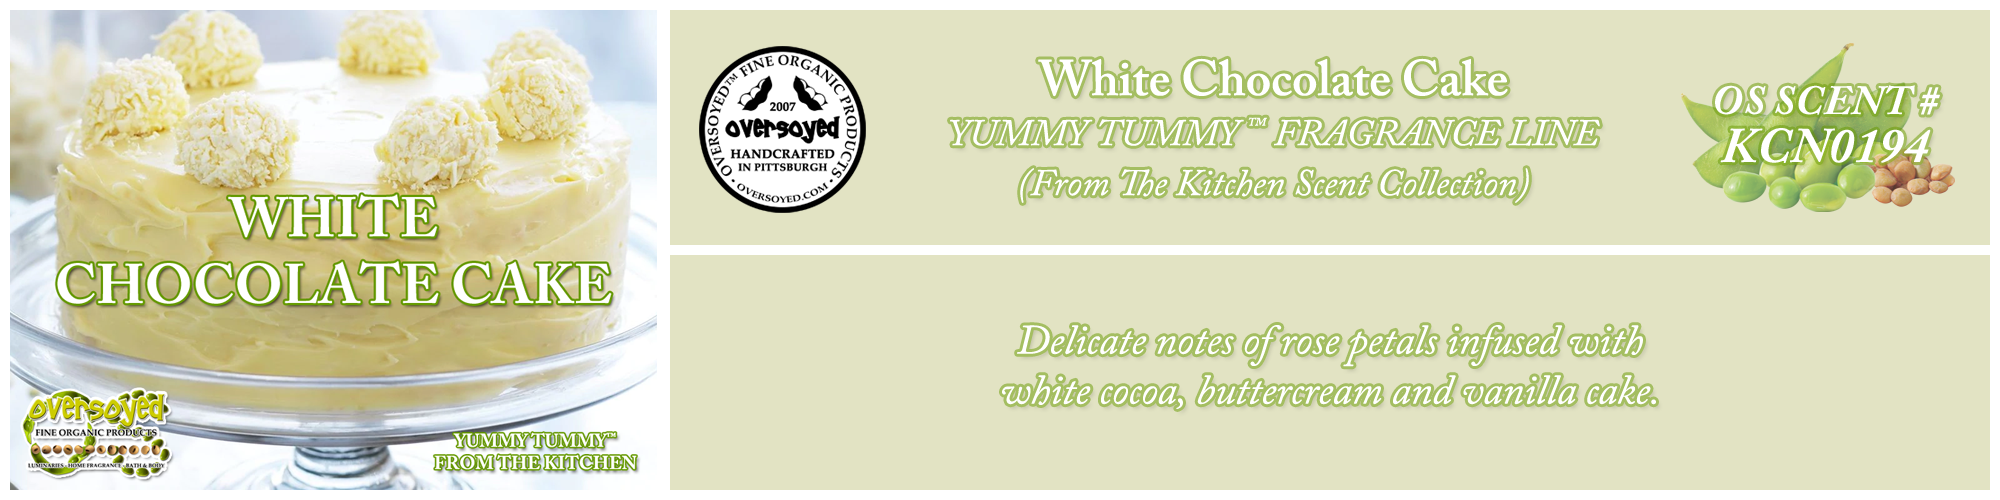 White Chocolate Cake Handcrafted Products Collection